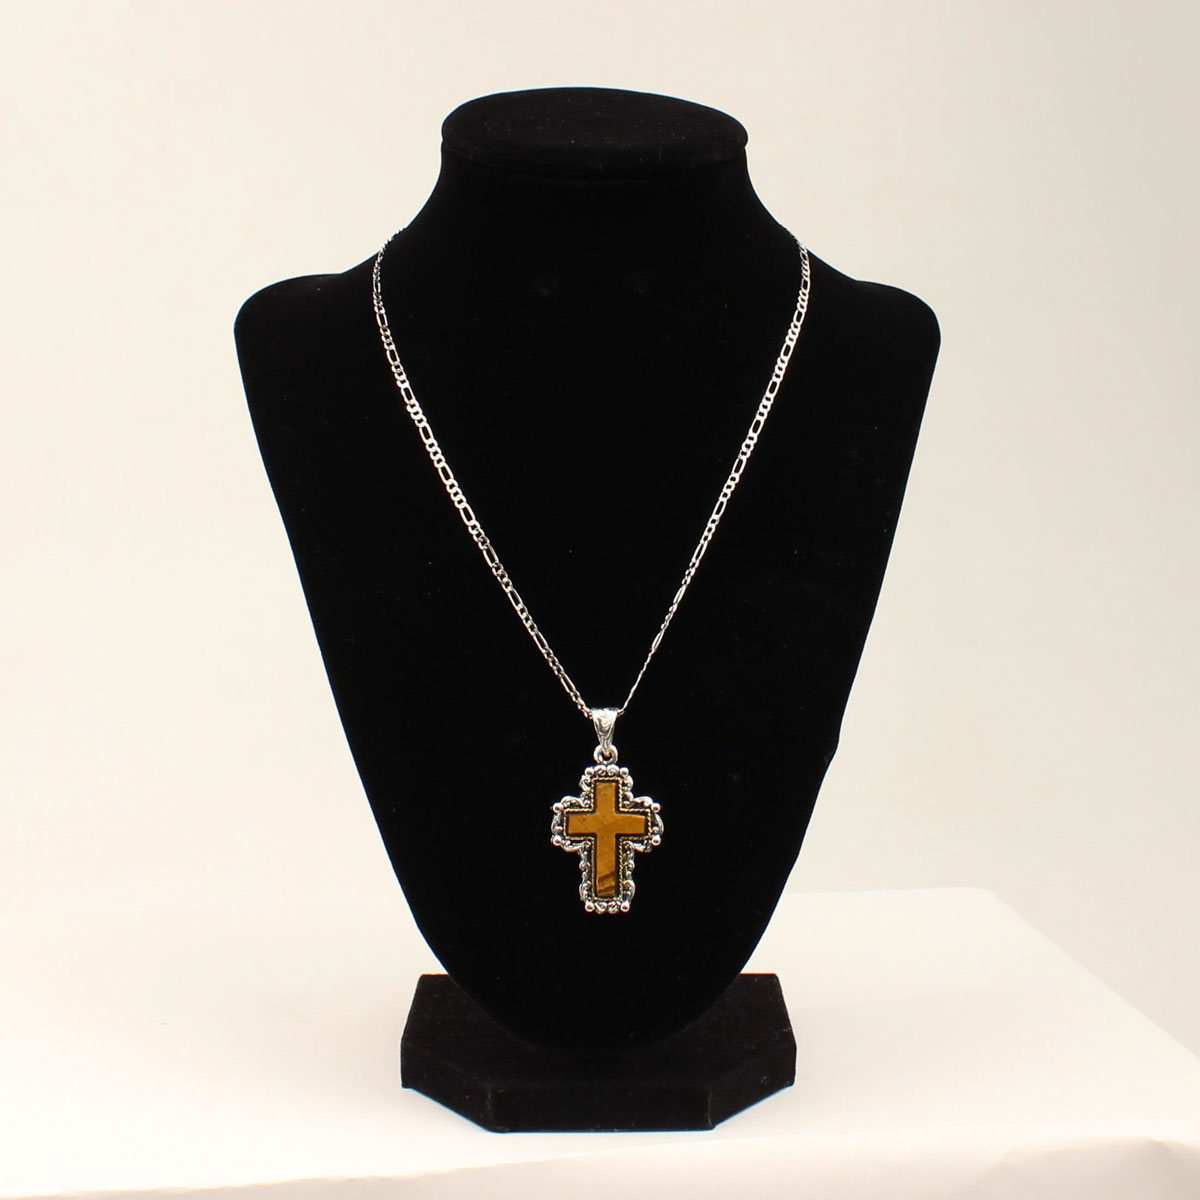 Dn141 Filigree Outline Cross Silver Strike Necklace, Silver & Gold With Brown - 1 X.75 In.